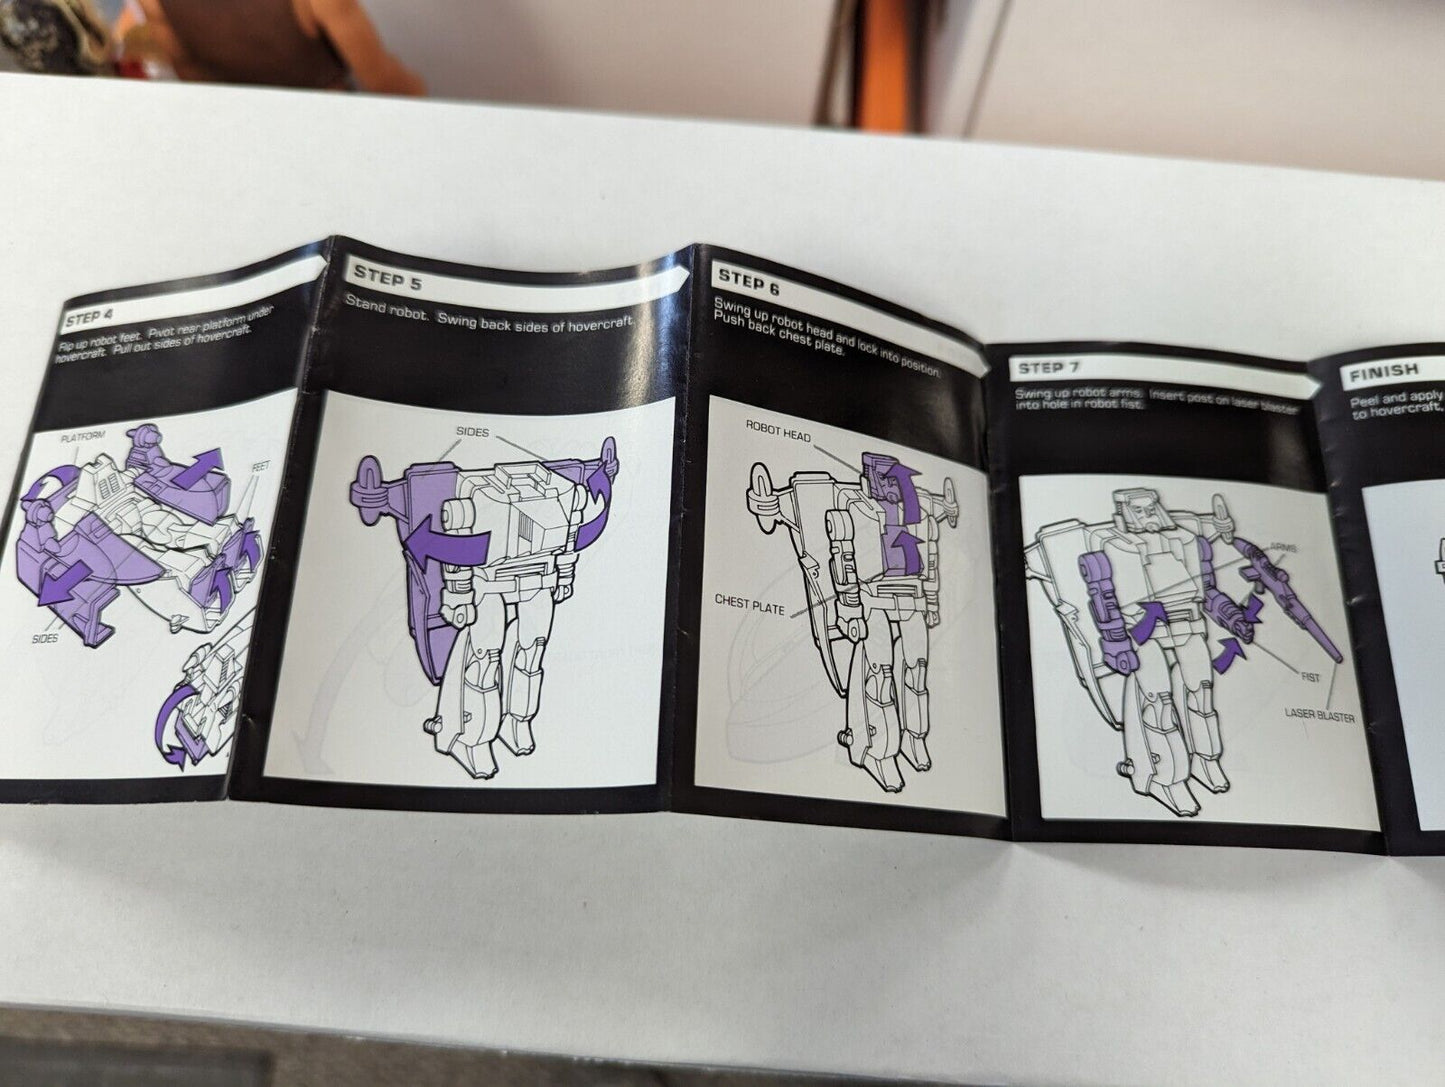 Transformers Scourge Instruction Booklet Only 1986